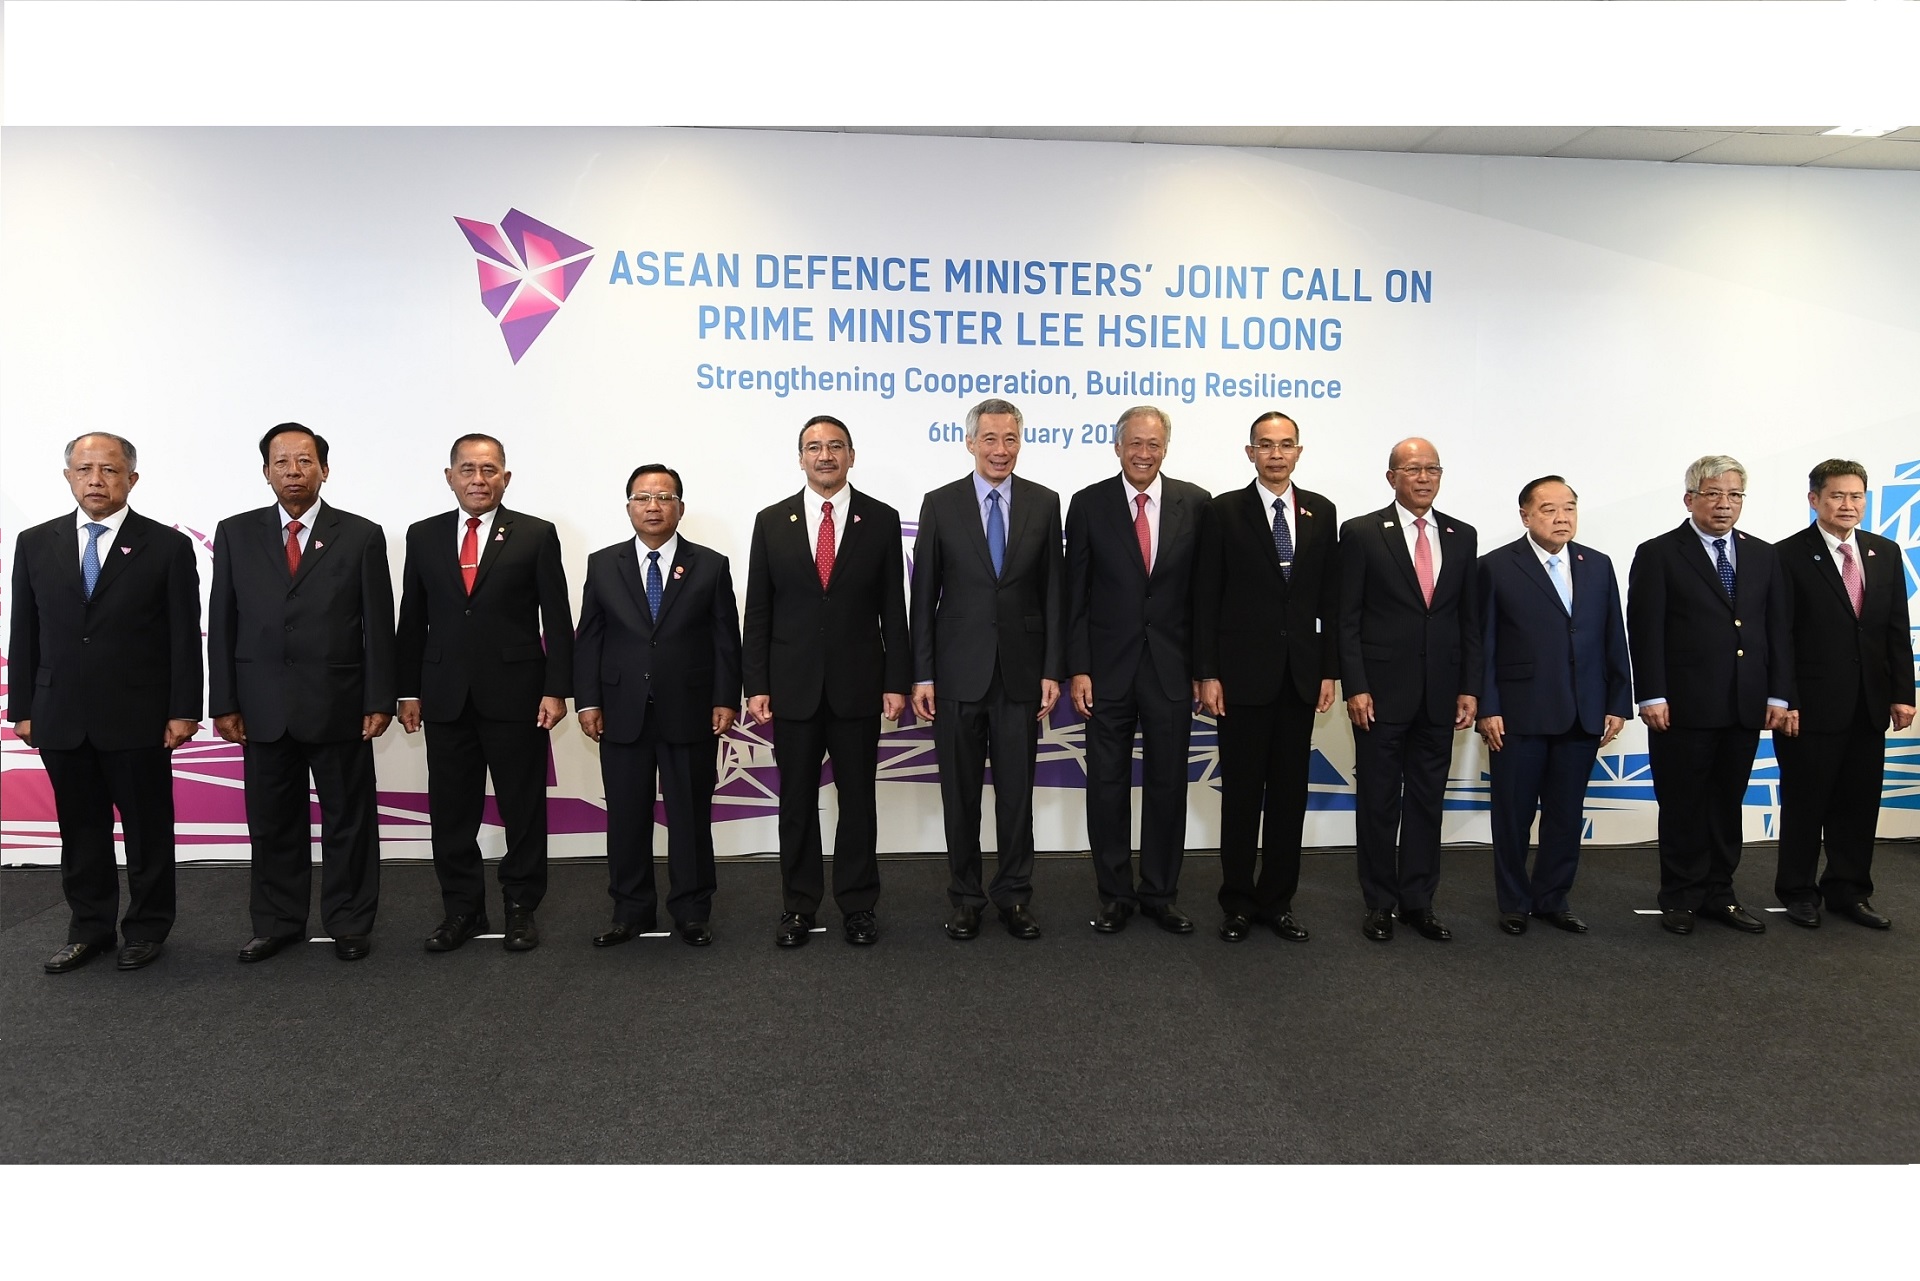 Defense-security cooperation among ASEAN nations in 2018